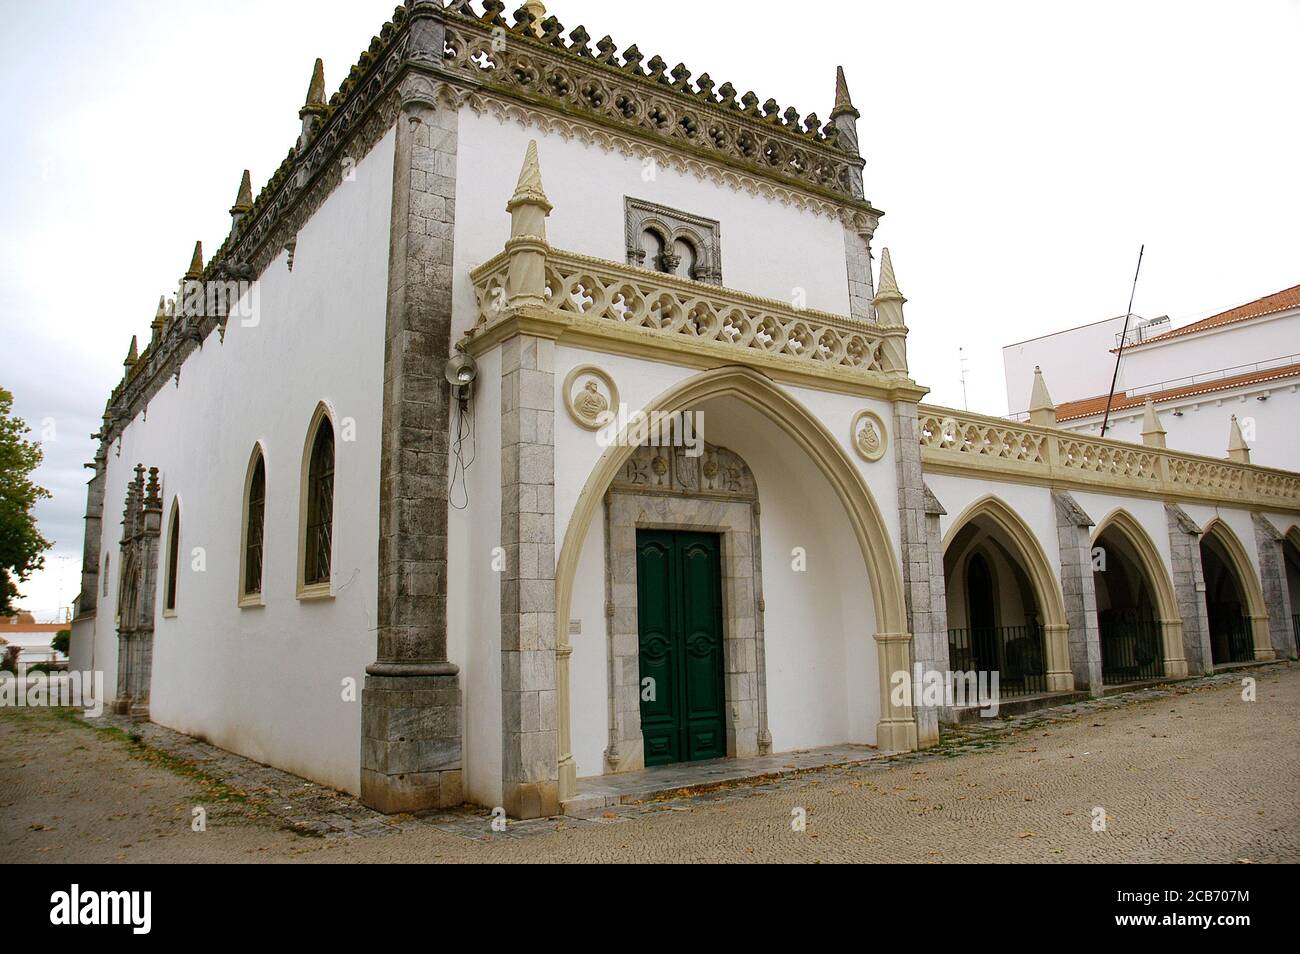 Portugal, Alentejo region, Beja. Convent of Our Lady of the Conception (Convento de Nossa Senhora da Conceiçao), a congregation of Poor Clares. It was founded in 1495. Today Museum Rainha Dona Leonor. General view of the facade and porch. Stock Photo